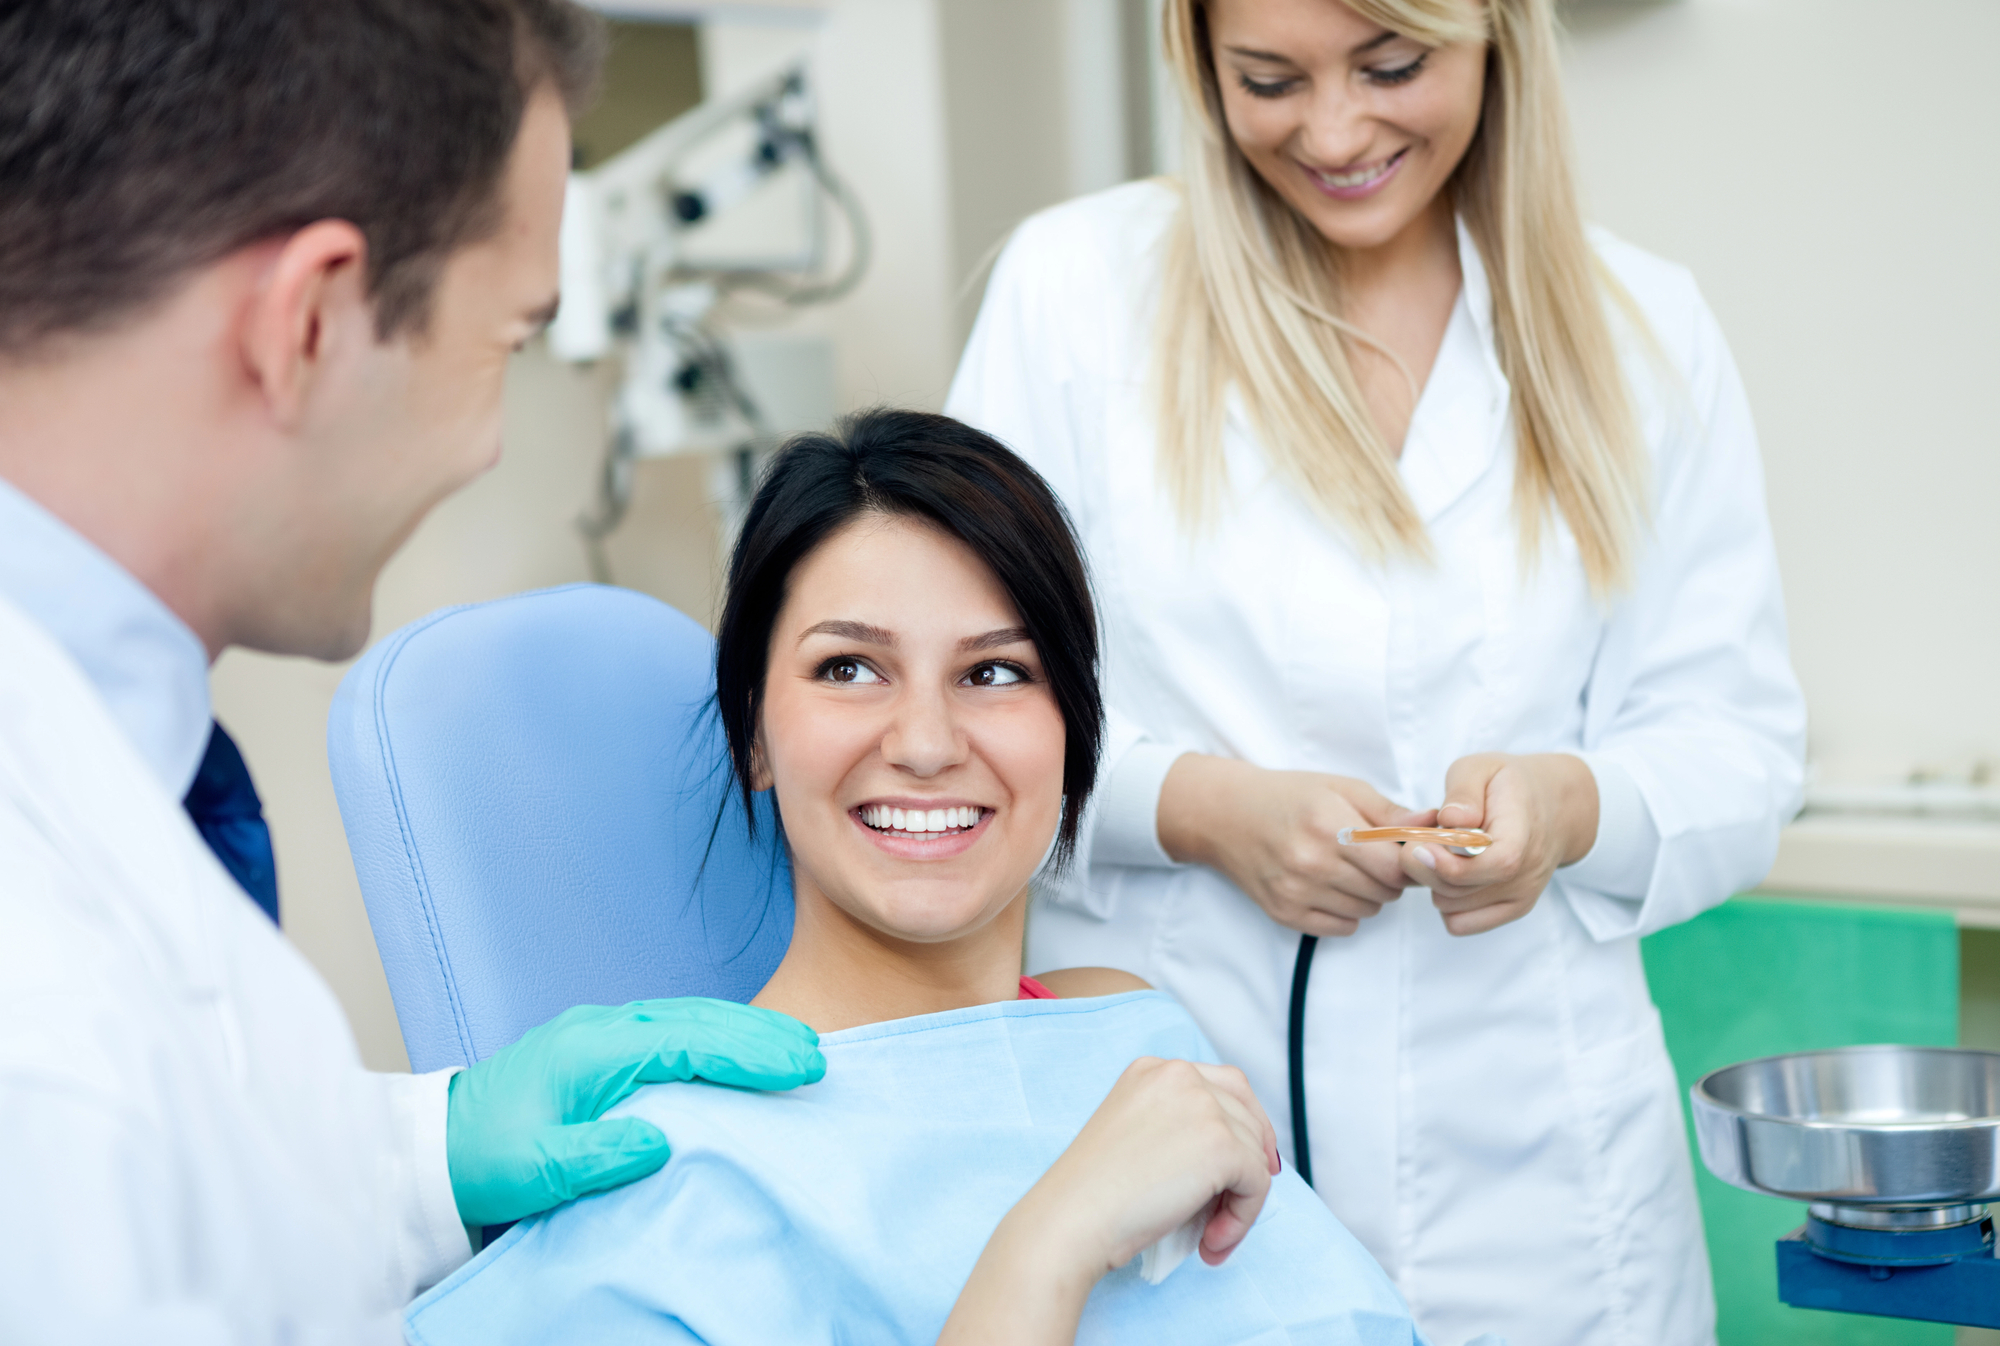 How Can Preventive Dental Care Help Families?